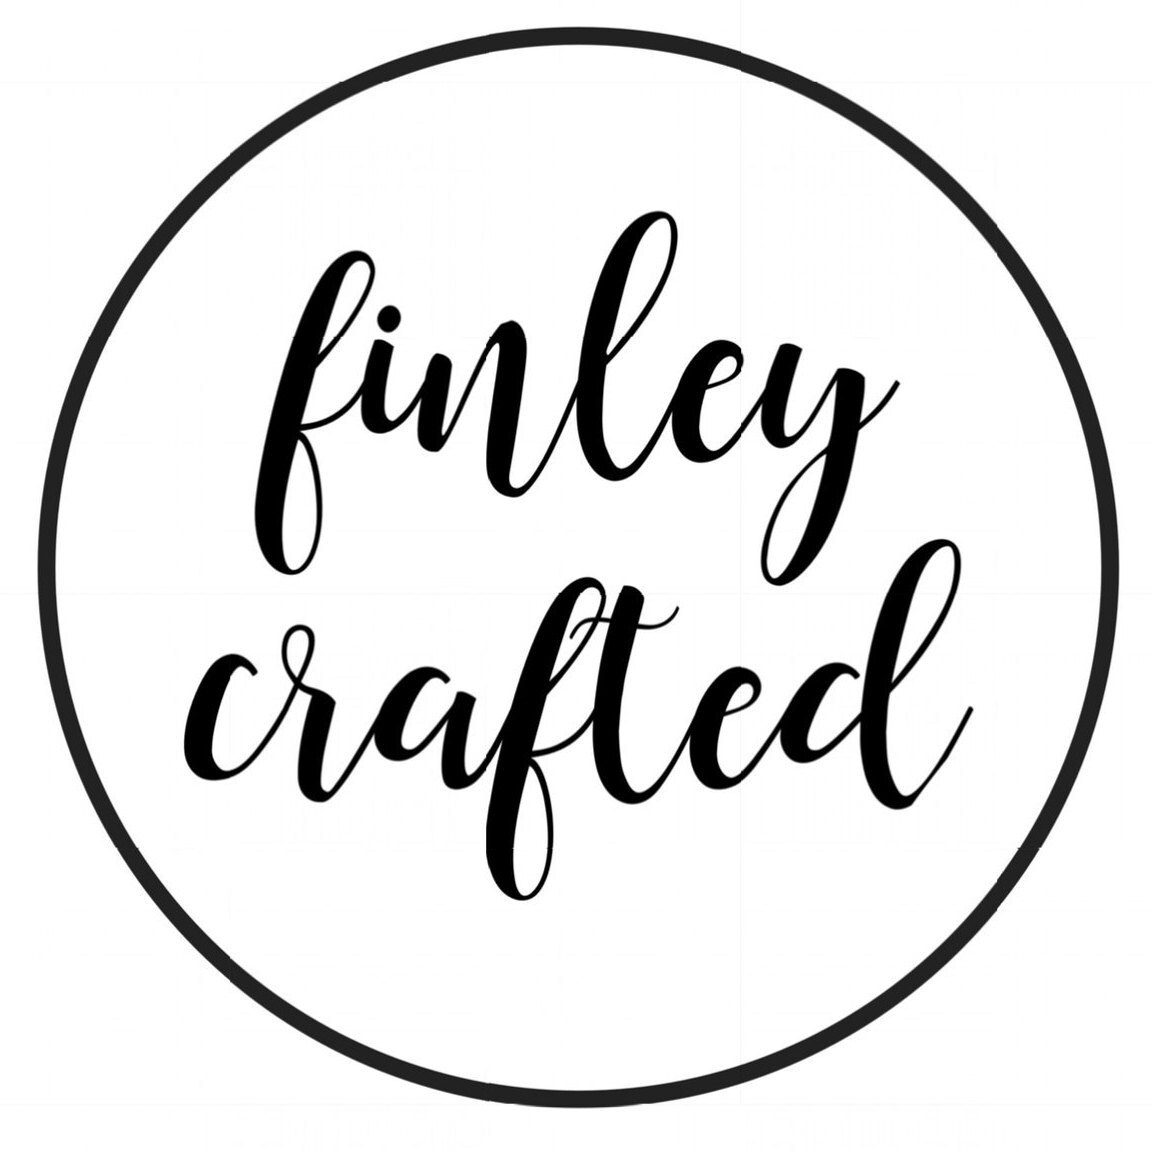 finleycrafted - Etsy